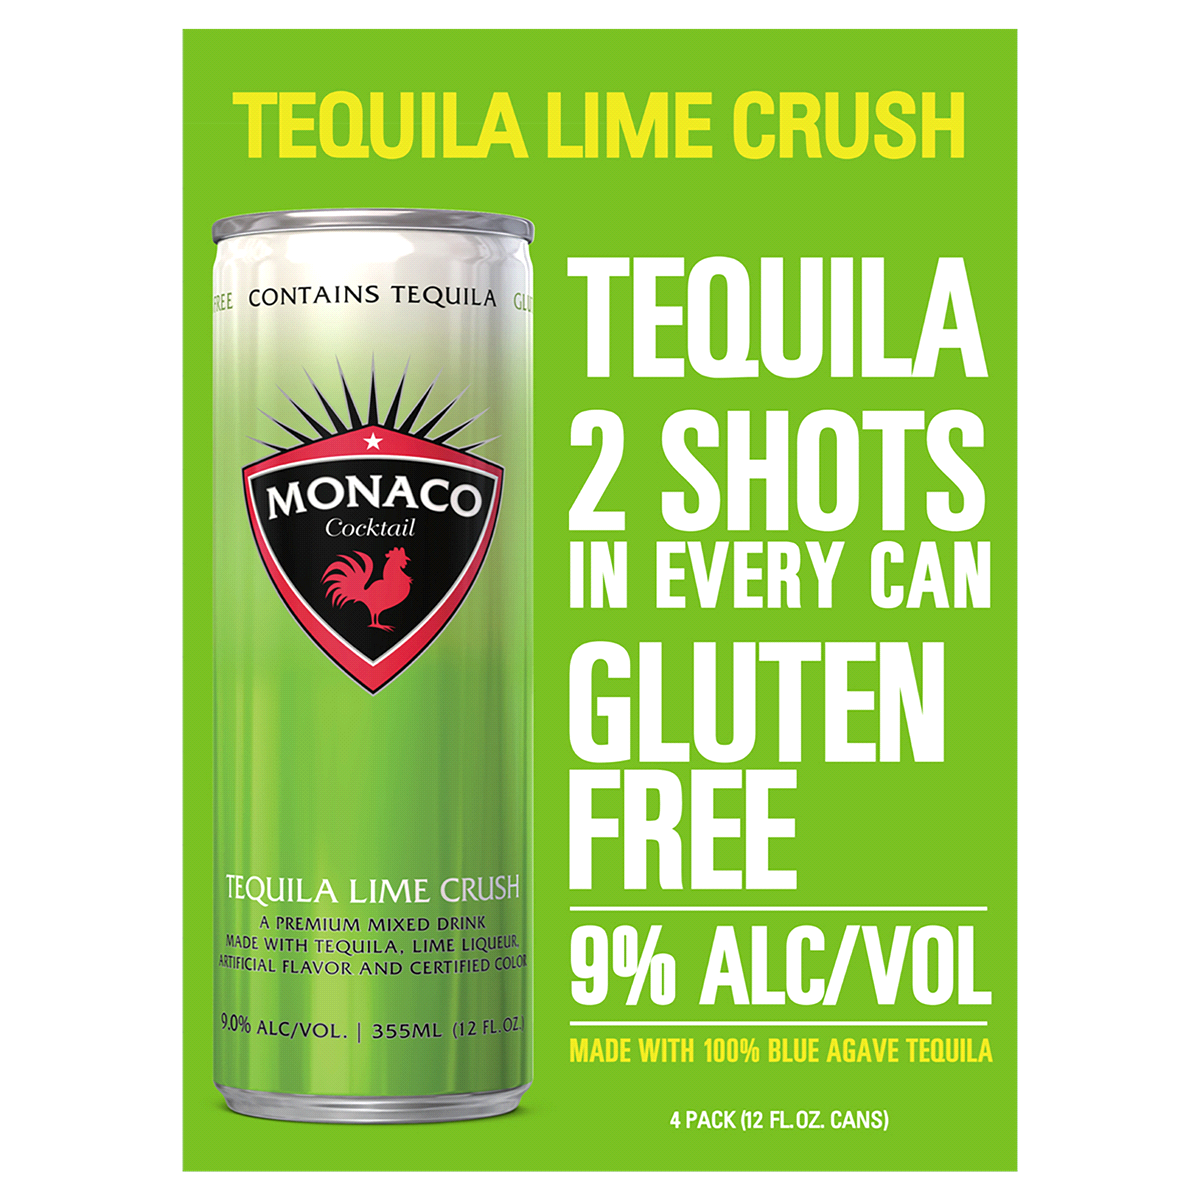 images/wine/SPIRITAS and OTHERS/Monaco Tequila Lime Crush.png